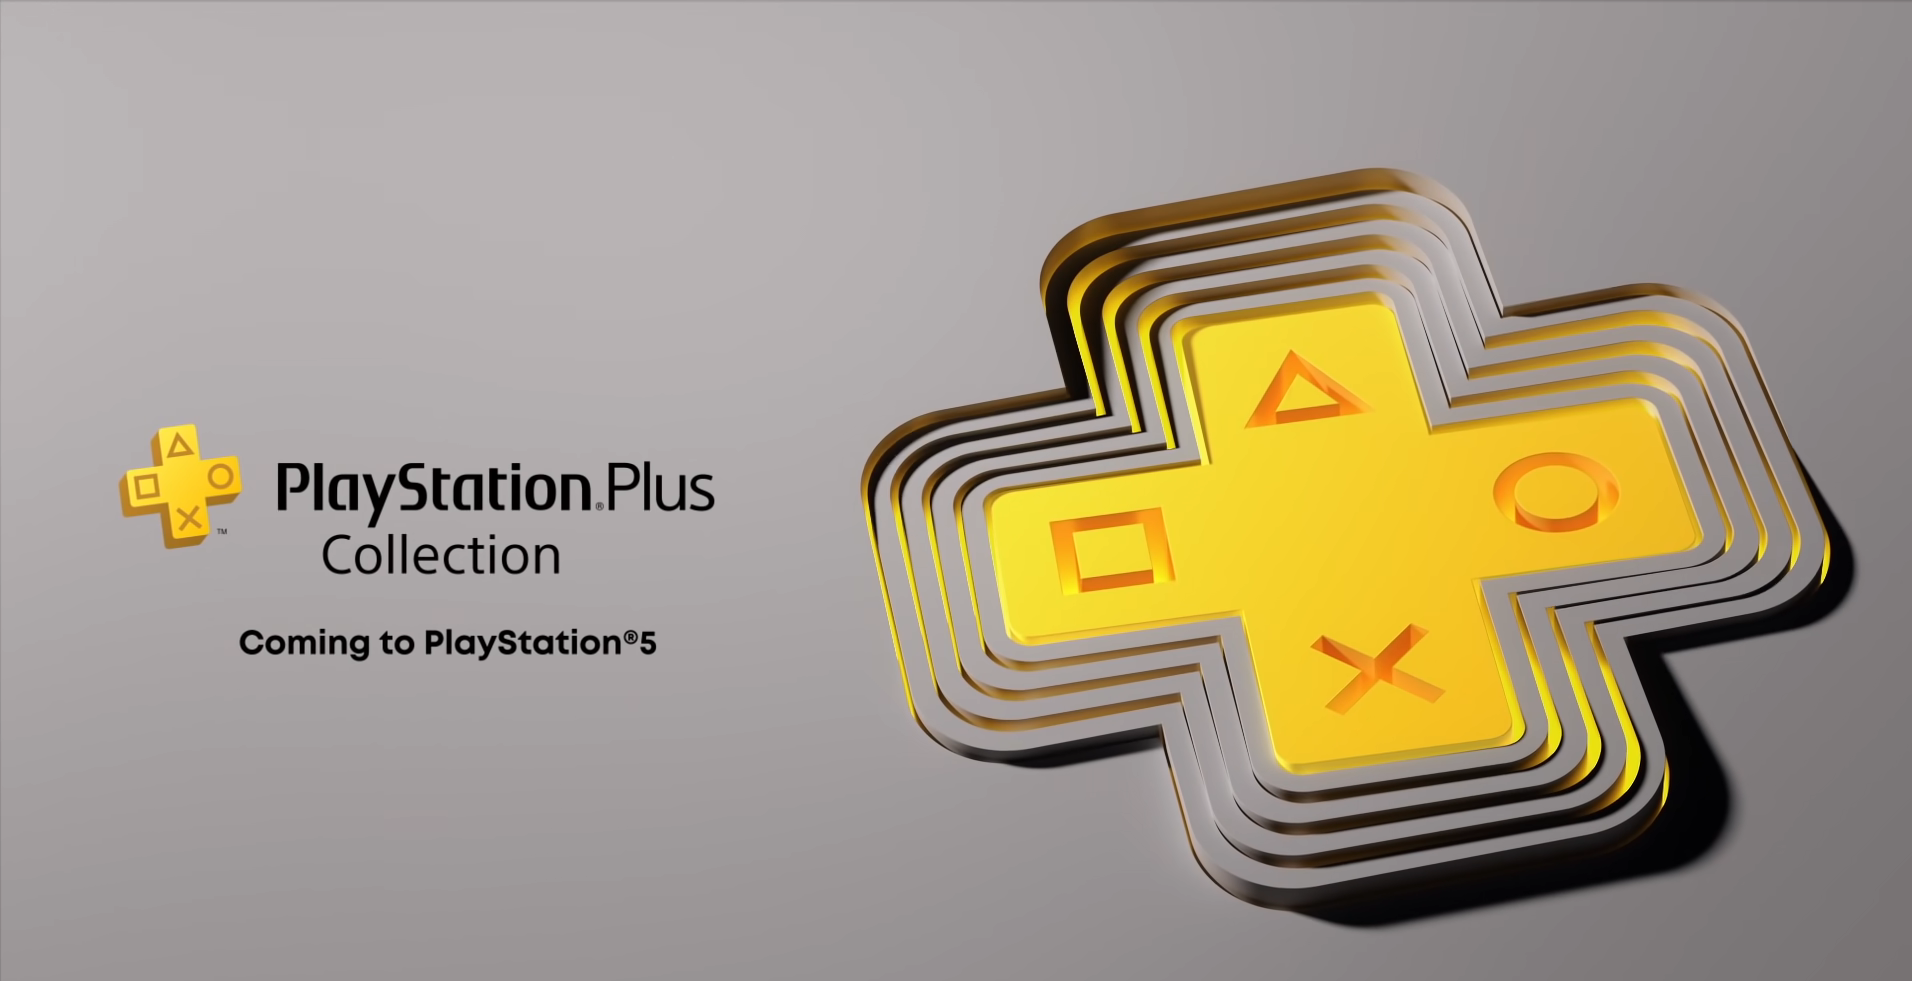 Playstation Plus Extra and Premium: the best games for subscribers